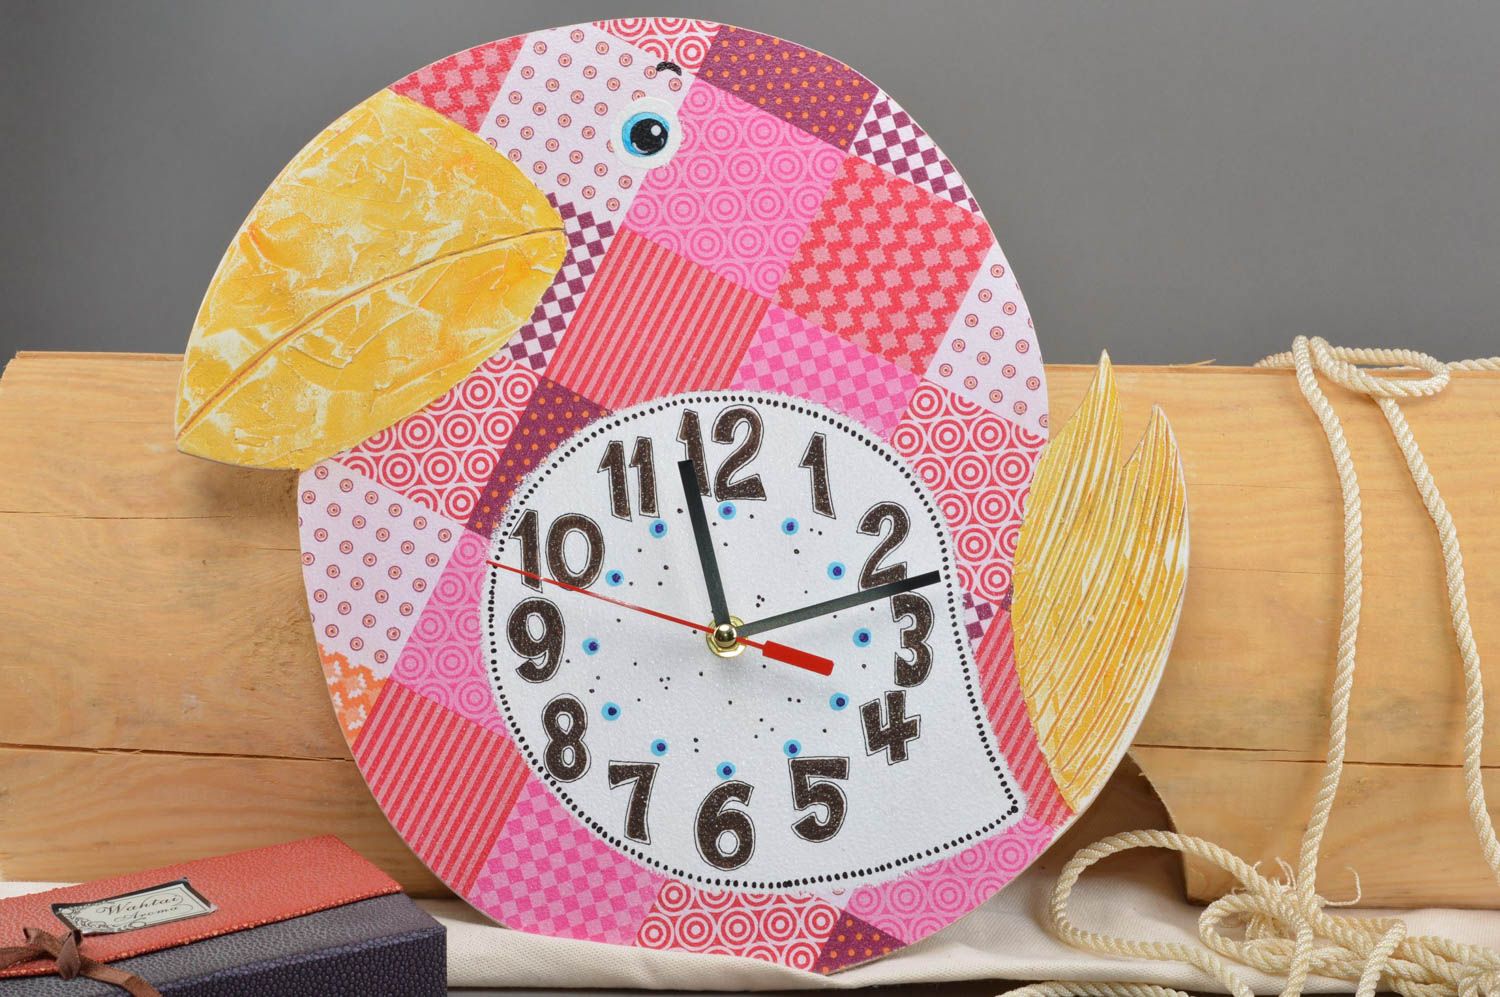 Cute handmade wall clock decoupage ideas cool bedrooms decorative use only photo 1